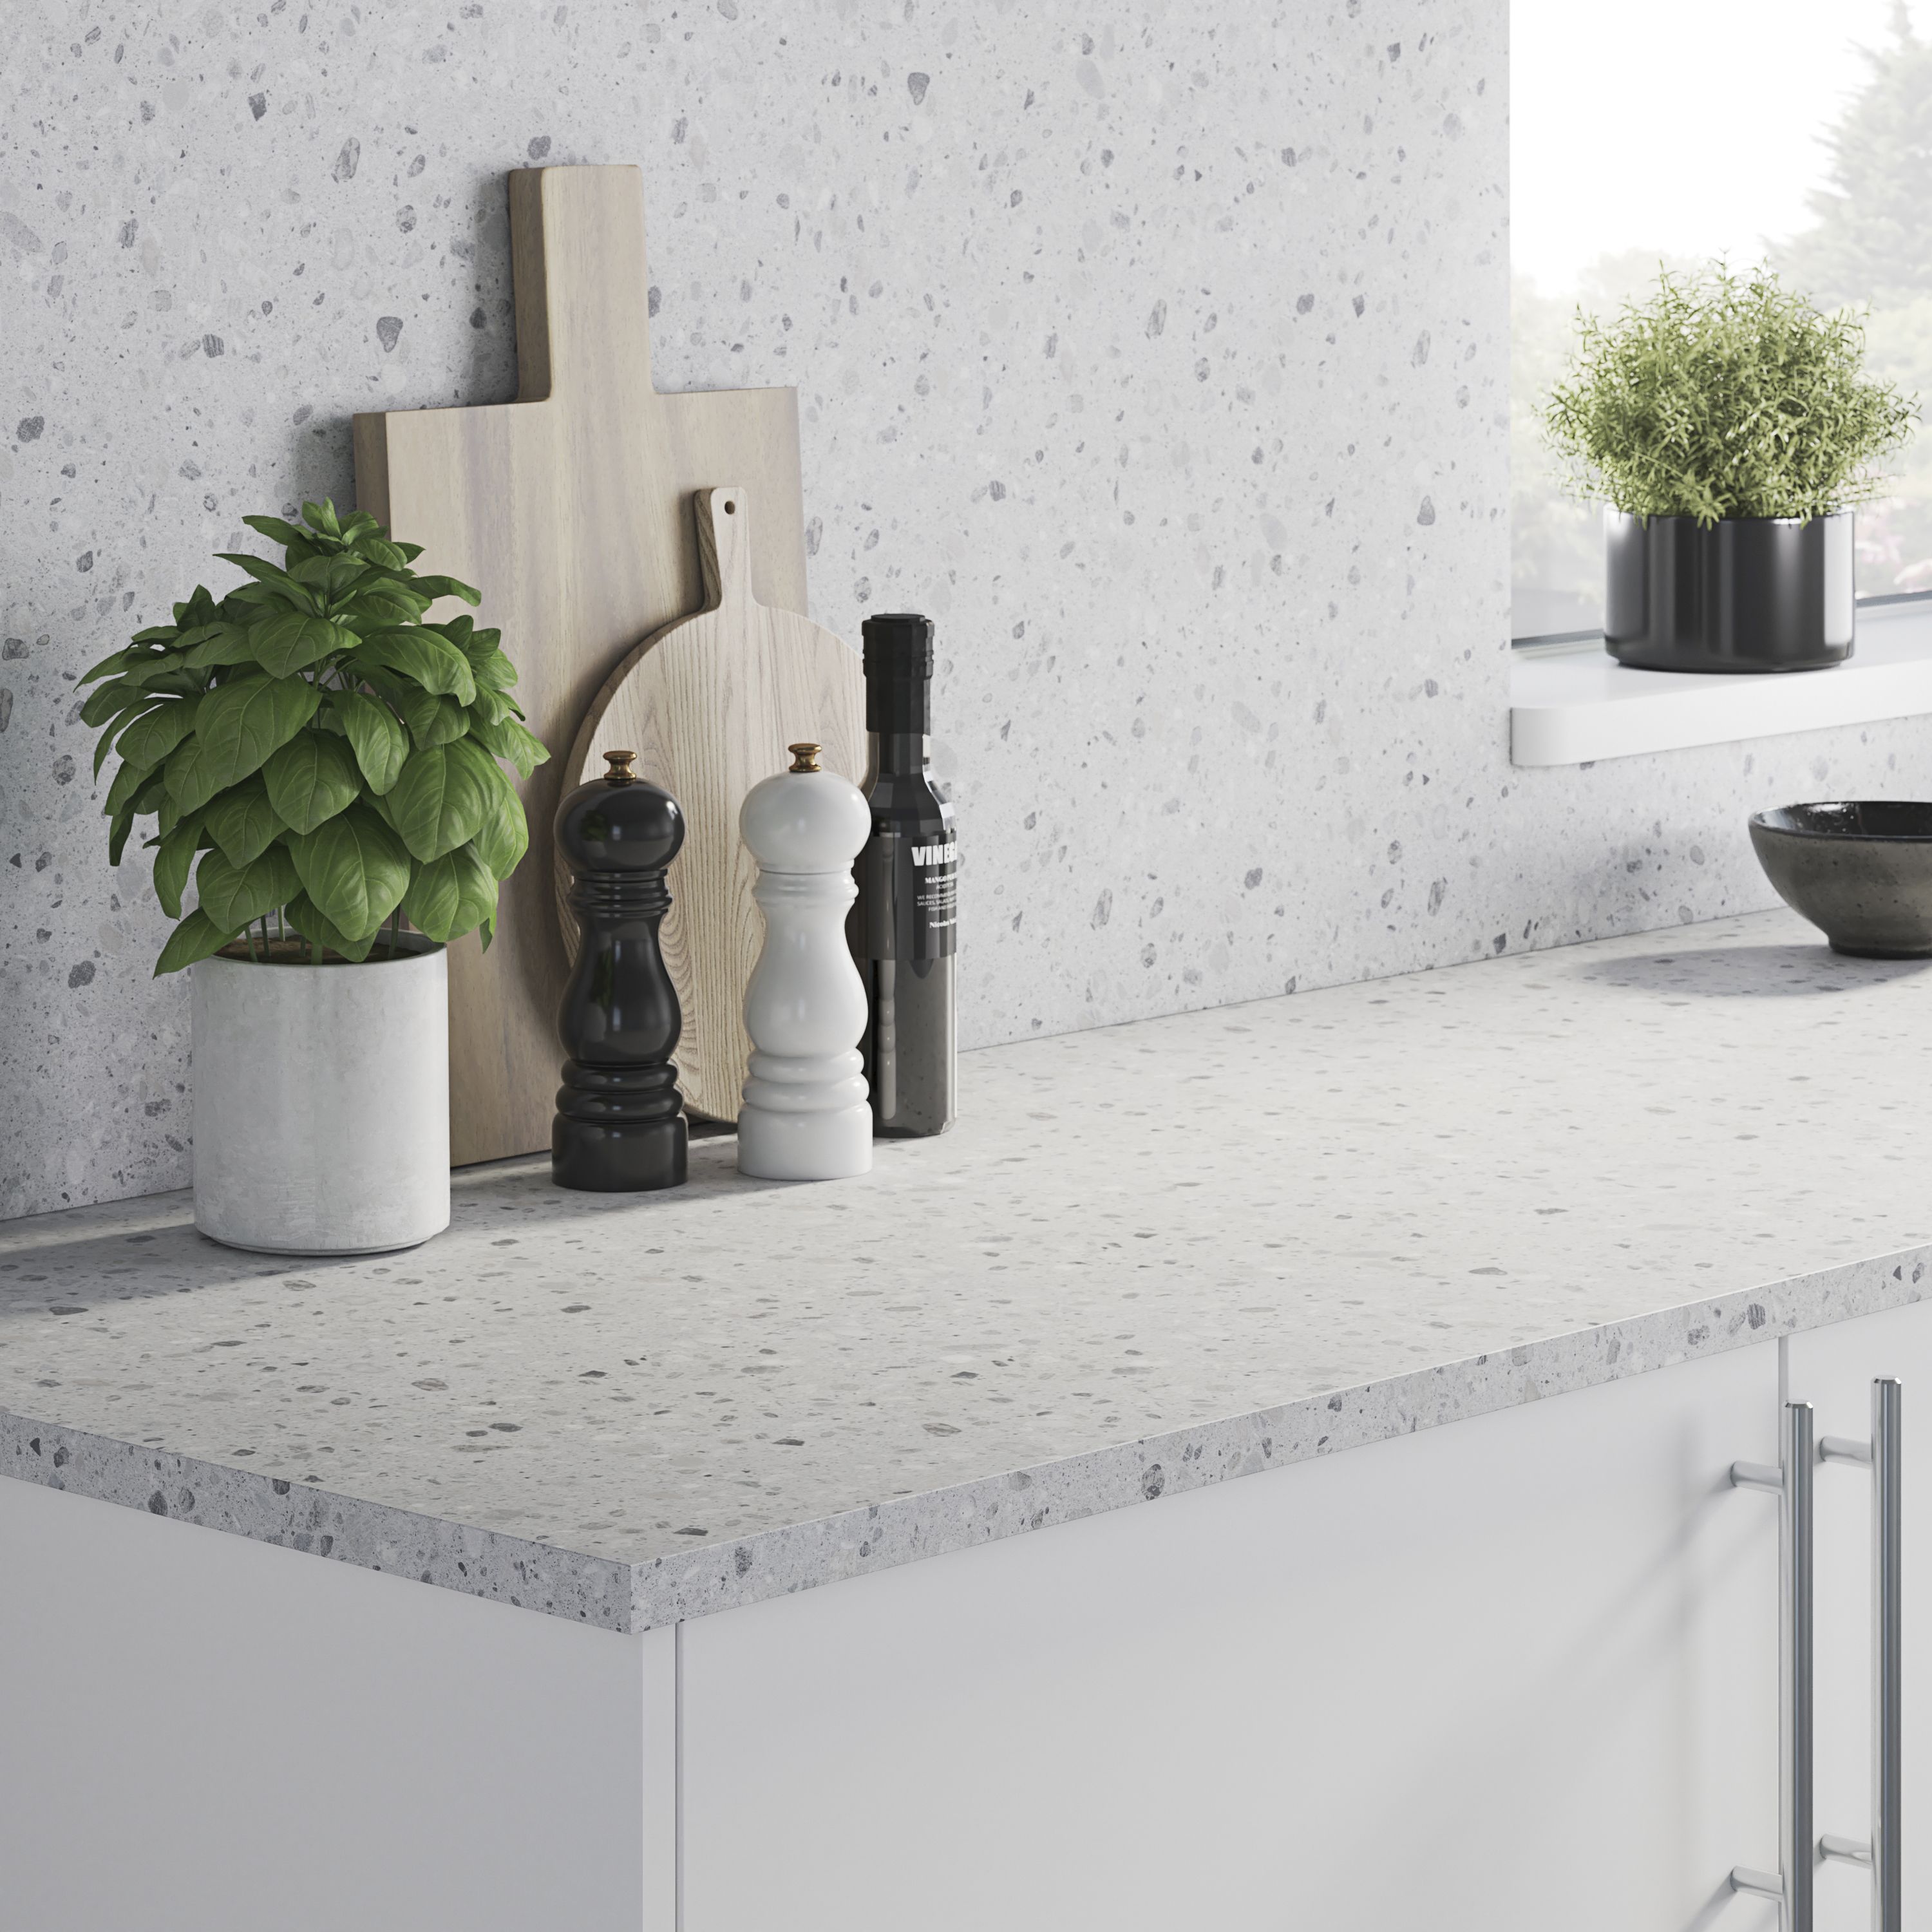 GoodHome Algiata Polished Grey Terrazzo effect Laminated chipboard Back panel, (H)8mm (W)600mm (T)8mm